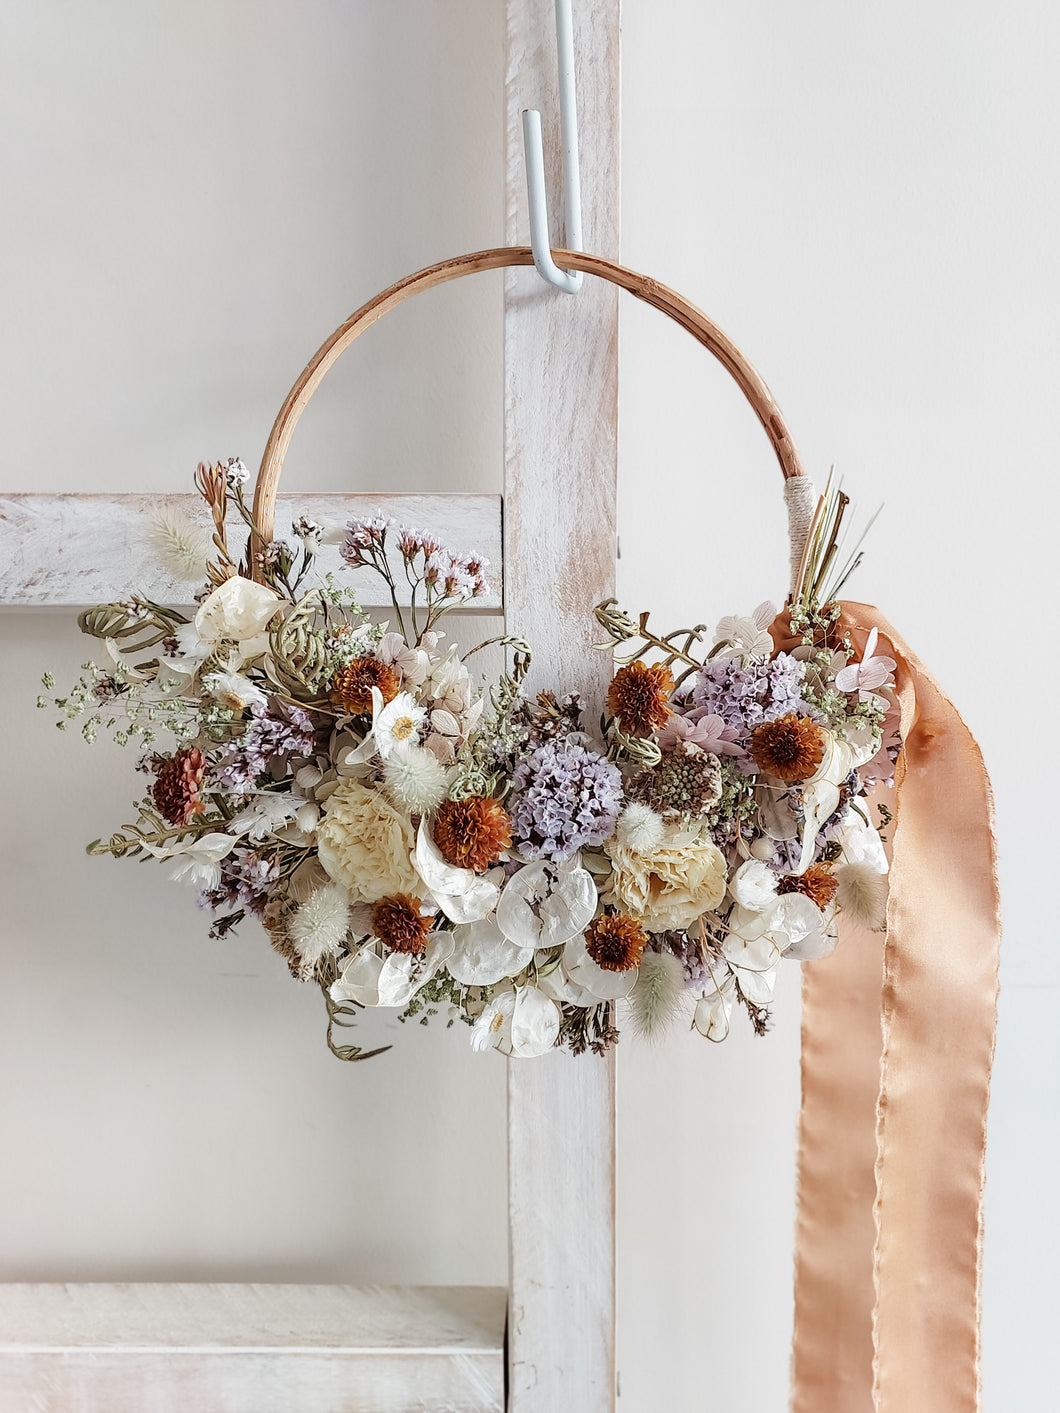 Dried flower wreath in lilac tones on a rattan hoop base – close full view.